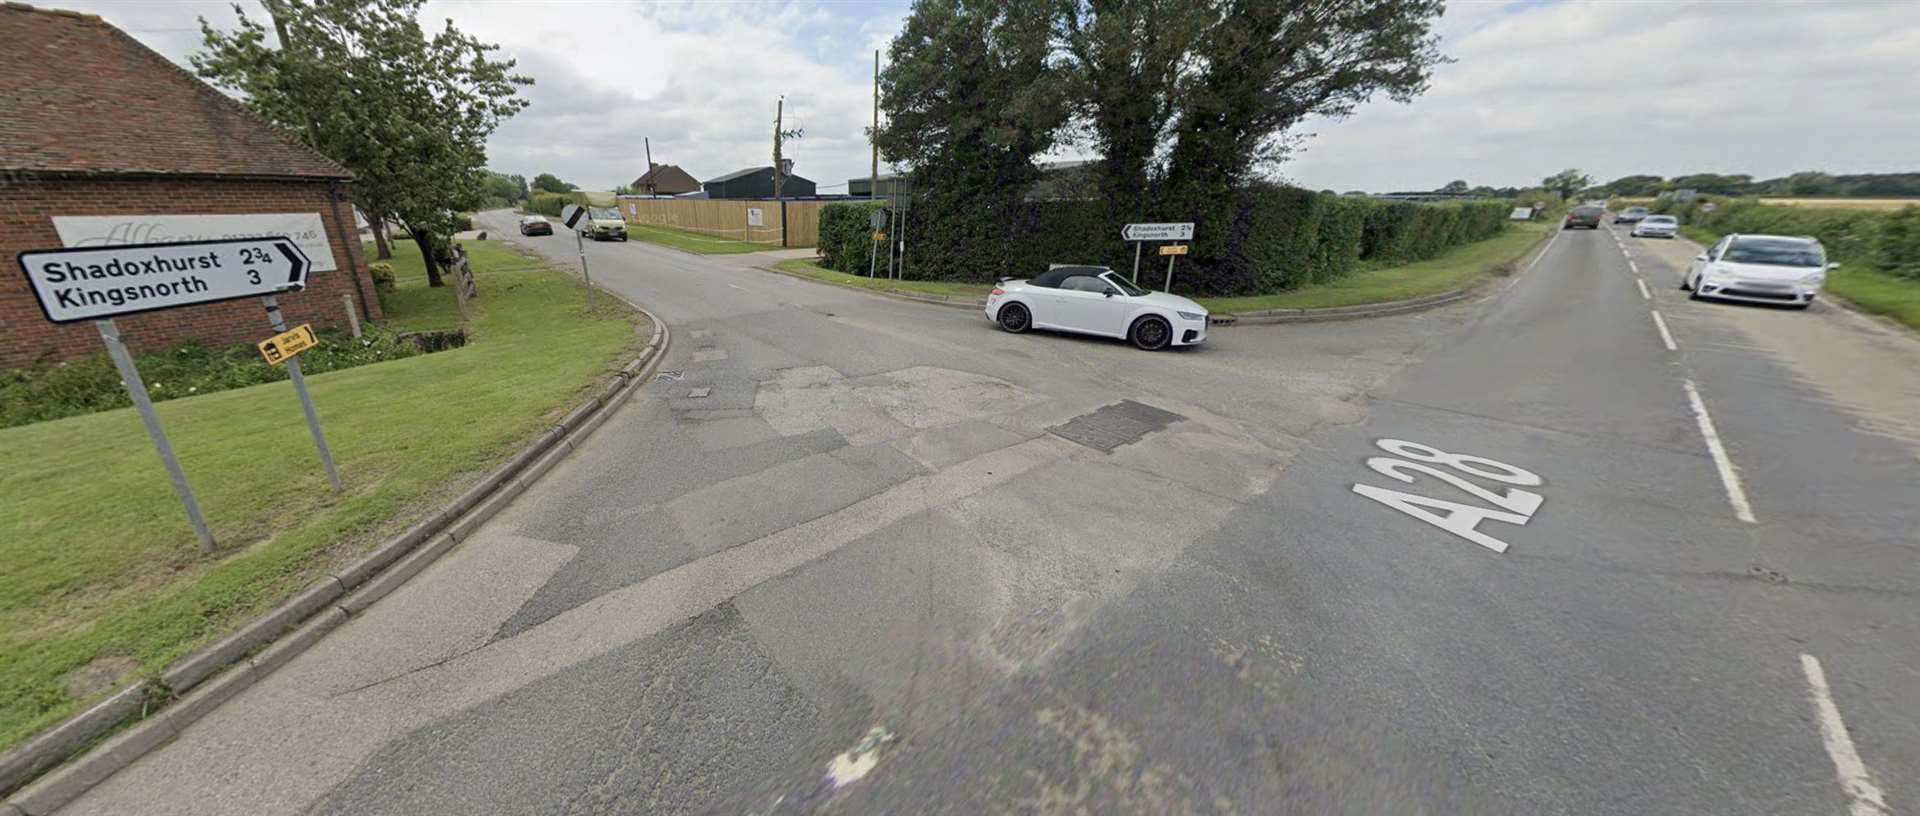 Access to Chilmington Green Road from the A28 will be closed when the new school opens. Picture: Google